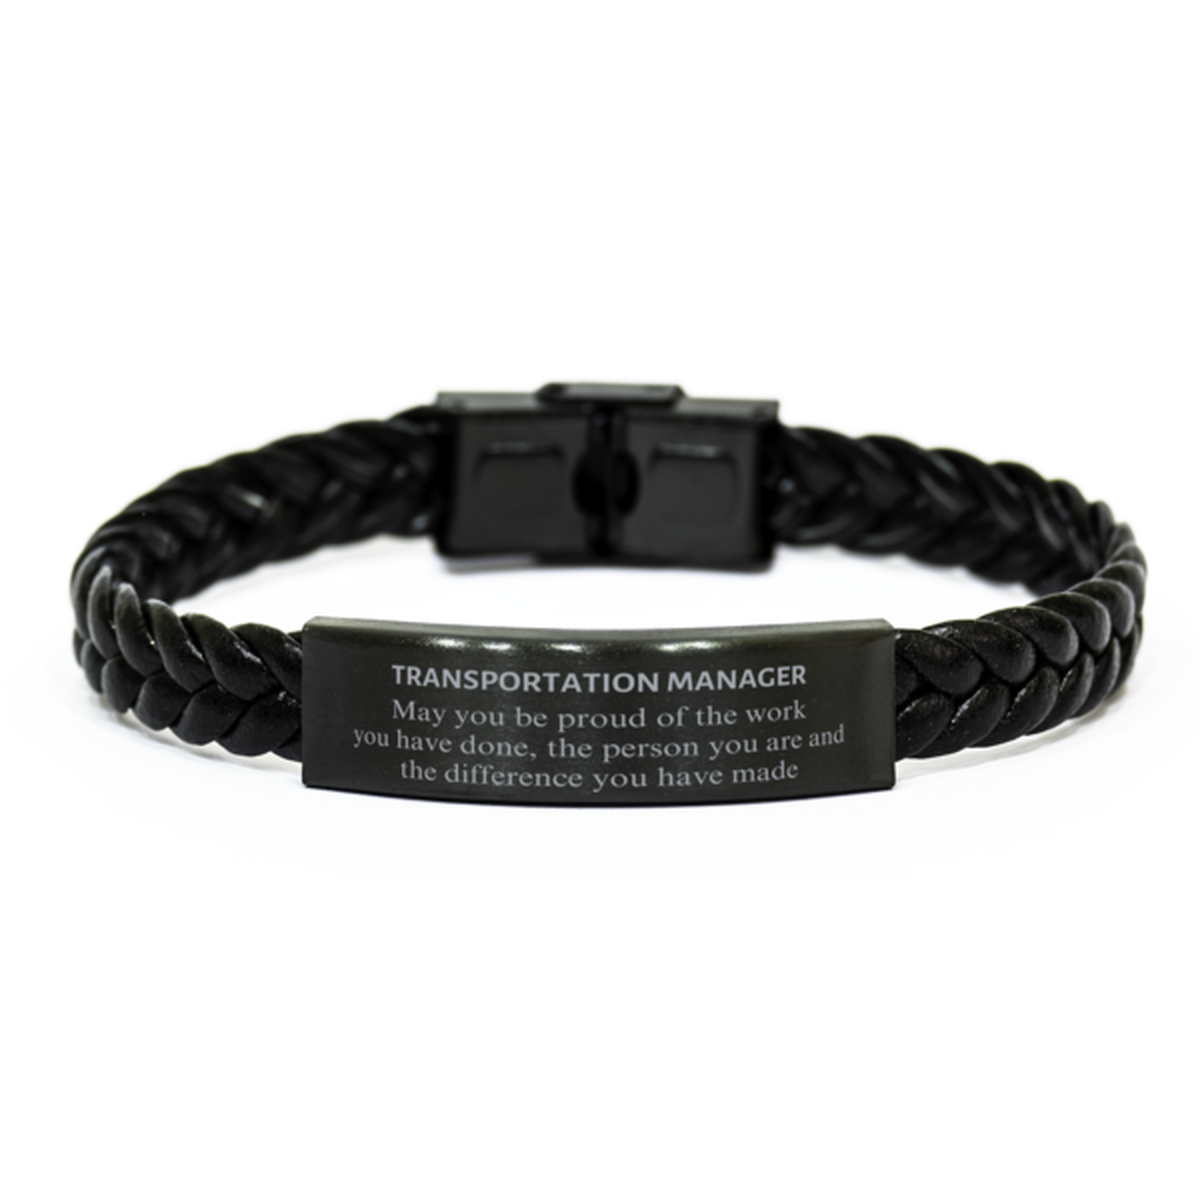 Transportation Manager May you be proud of the work you have done, Retirement Transportation Manager Braided Leather Bracelet for Colleague Appreciation Gifts Amazing for Transportation Manager